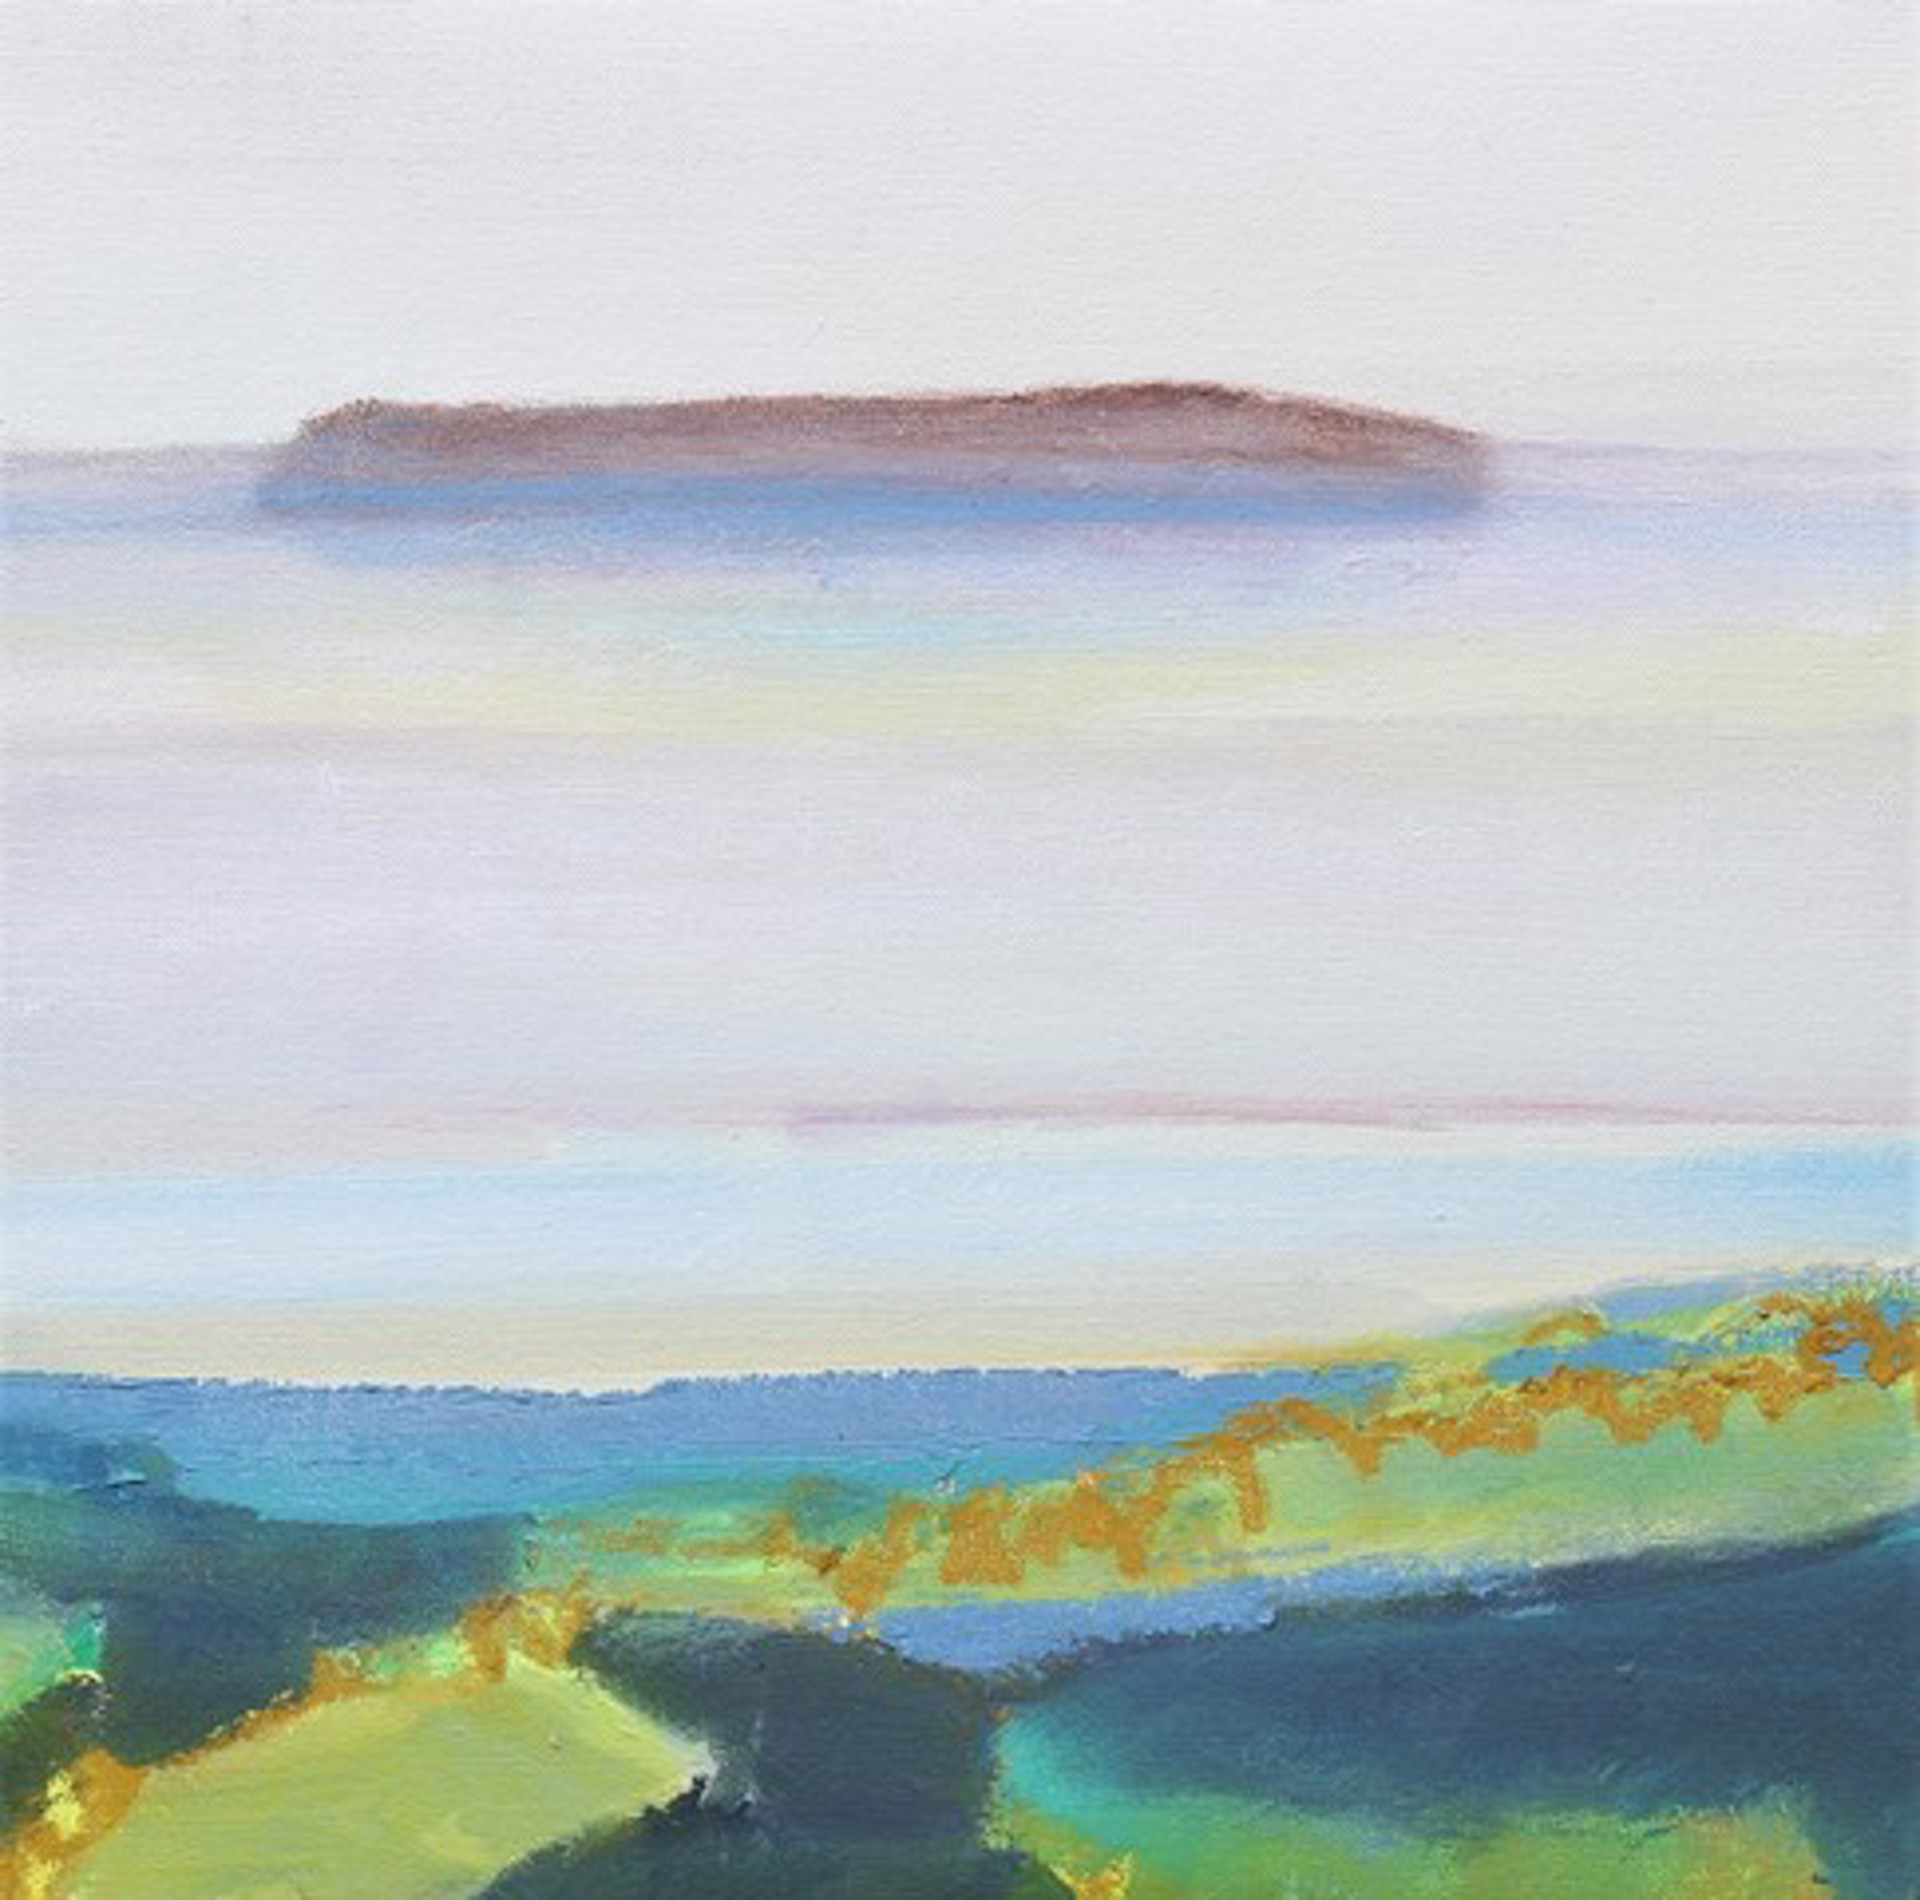 ALL I NEED IS THE SMELL OF THE SEA II by CHRISTINA THWAITES (Landscape)